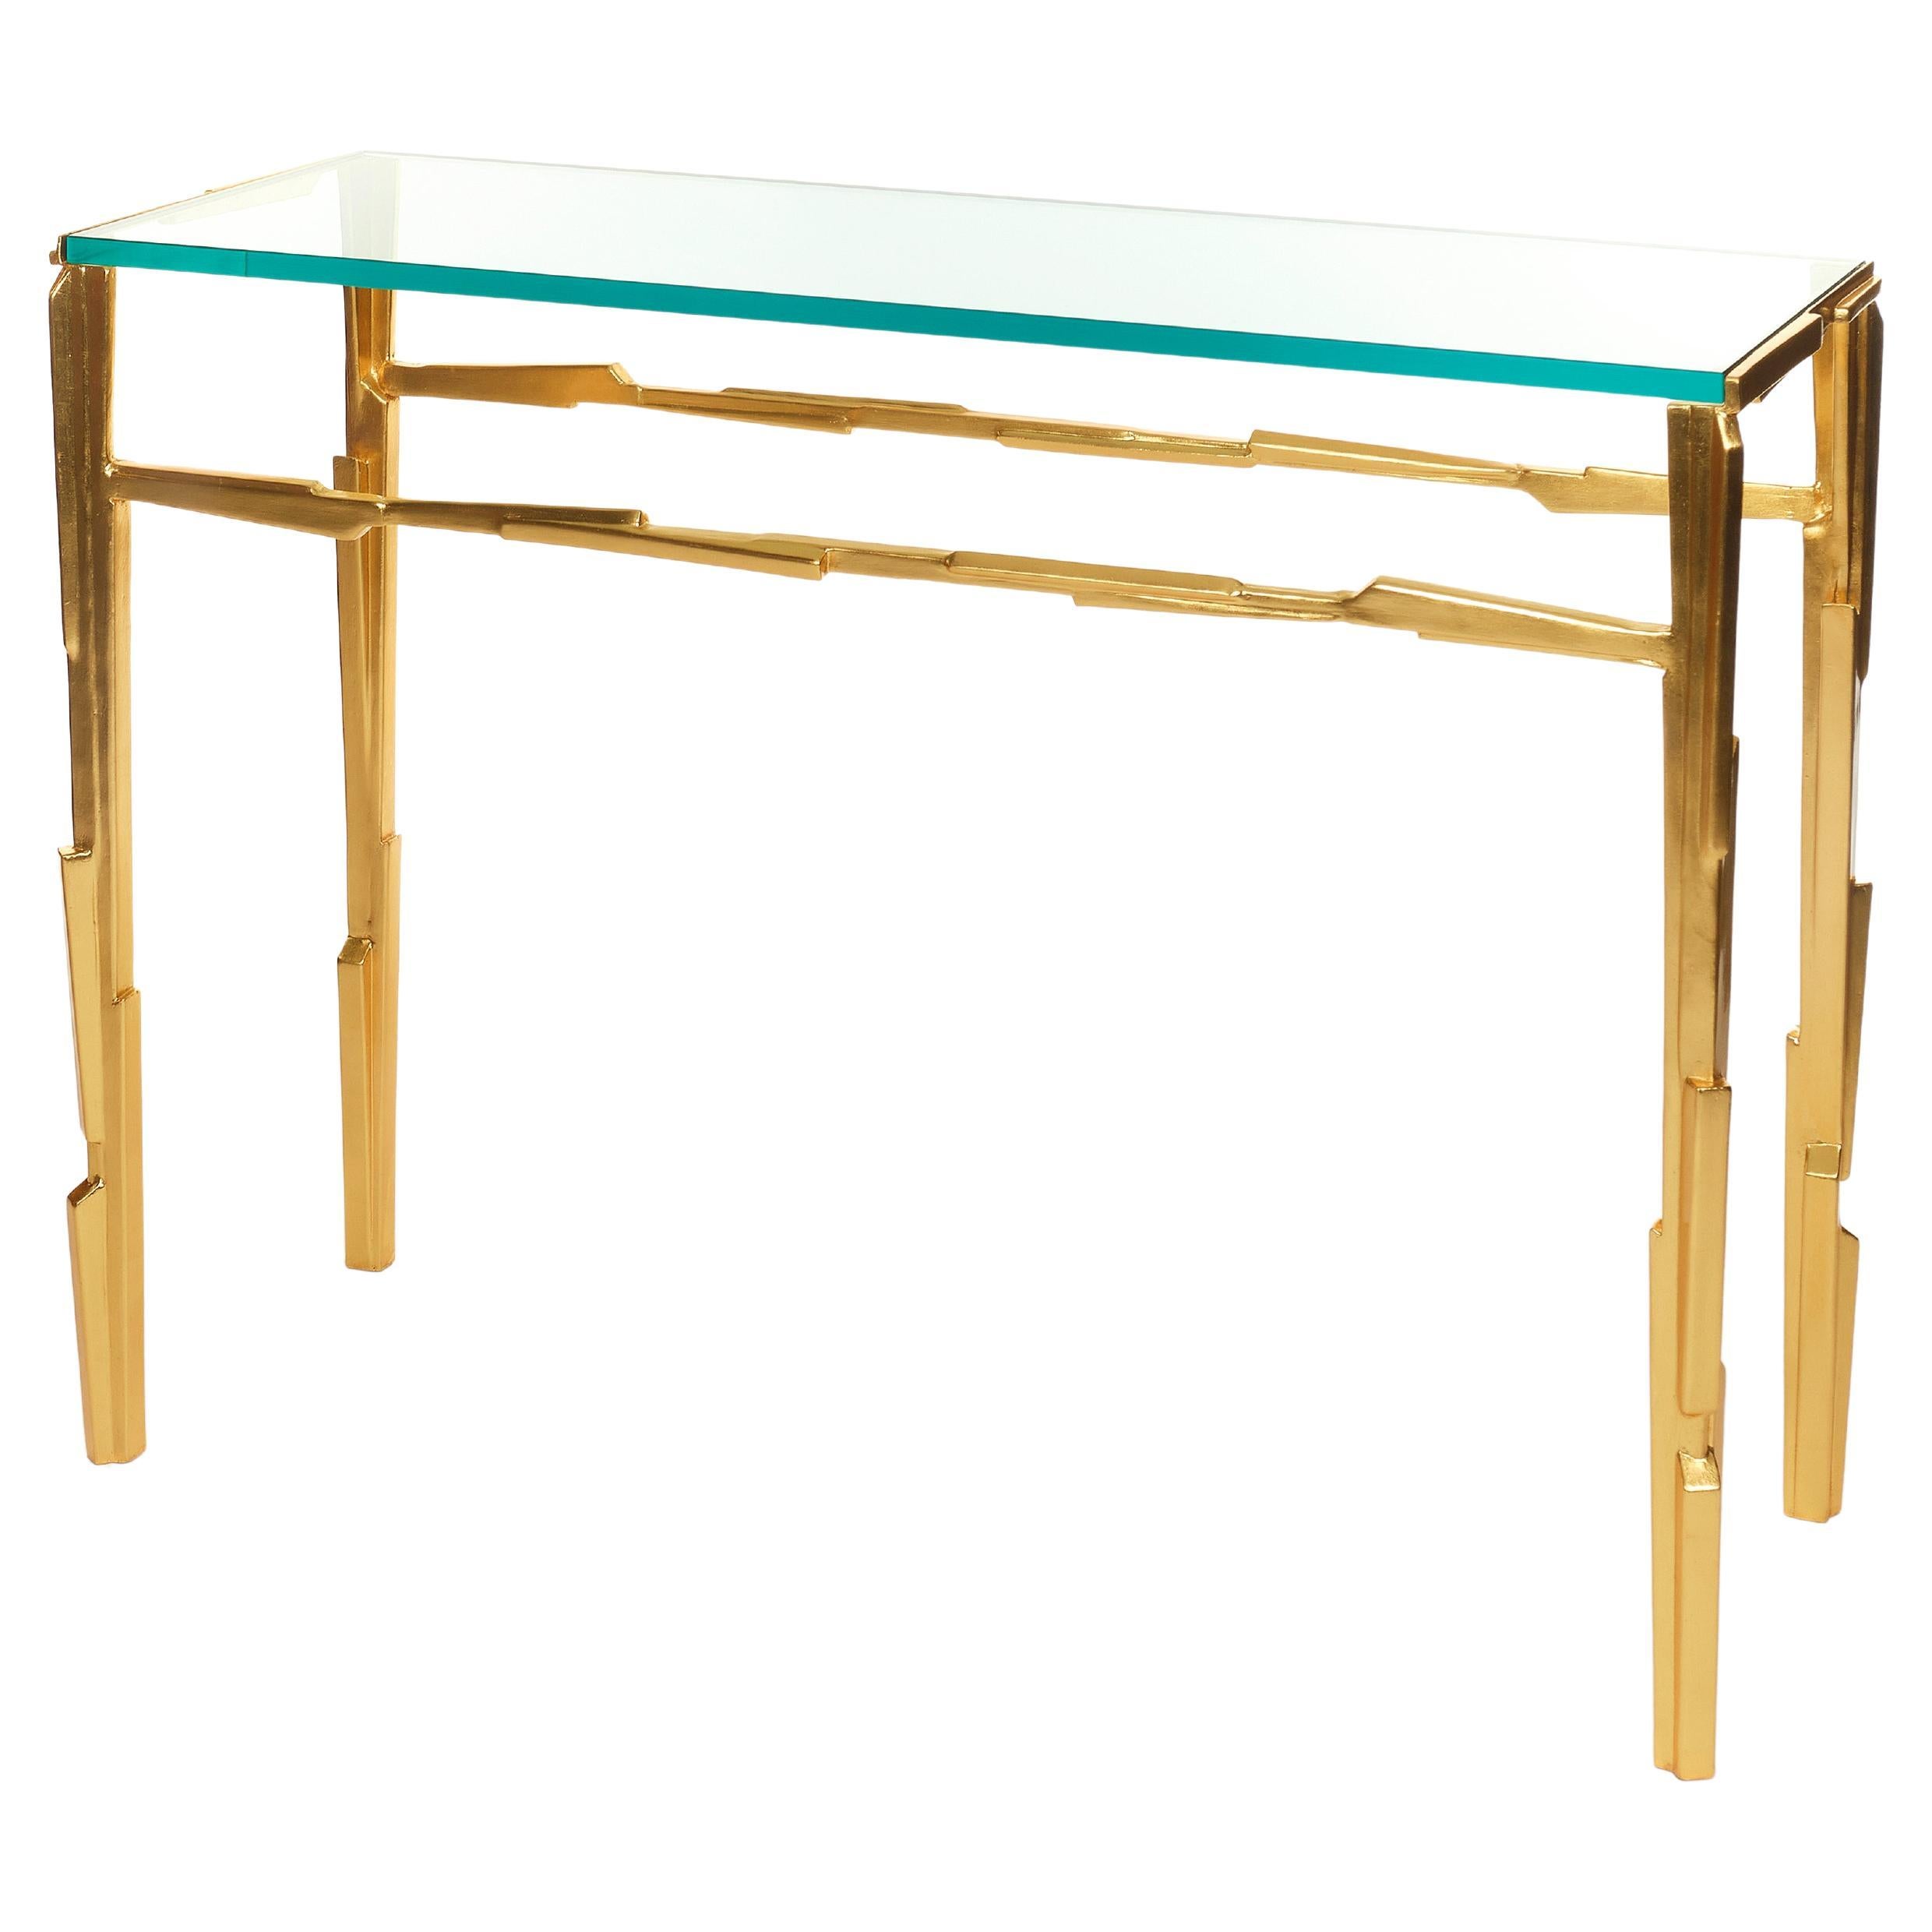 "Linea" Contemporary Console Table, gilded with 23K Yellow Gold, Benediko For Sale